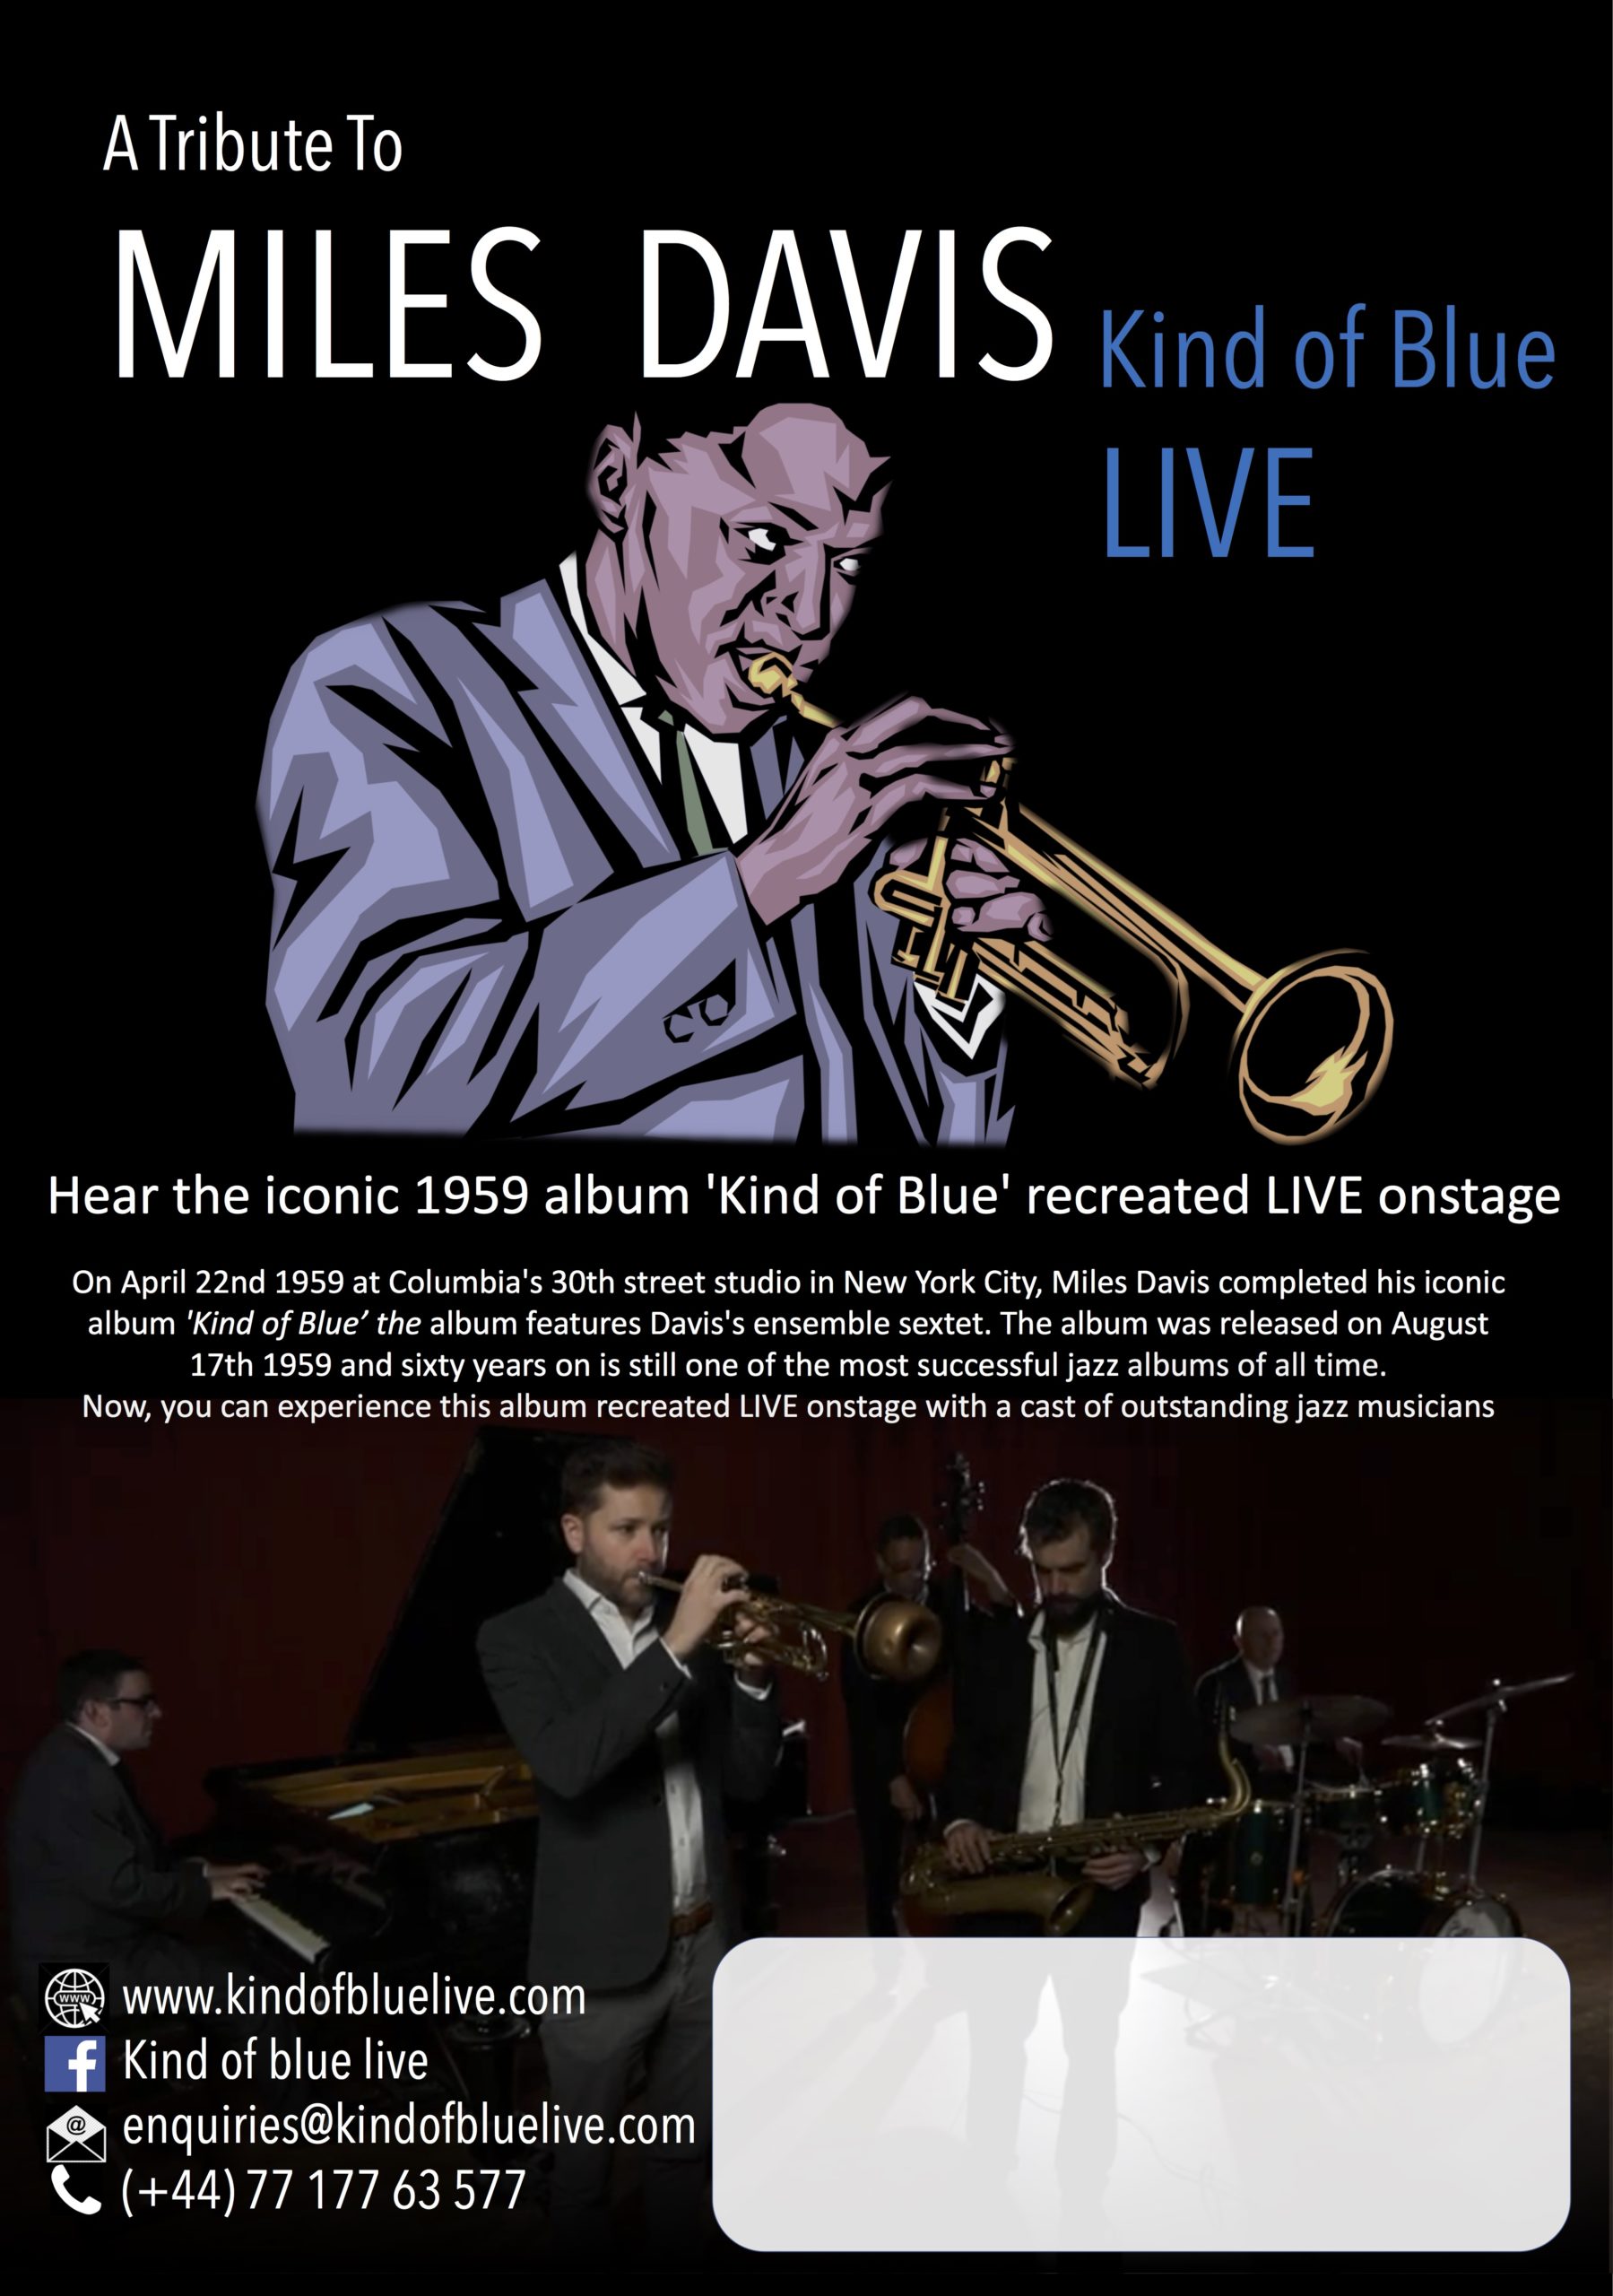 Kind of Blue – A tribute to Miles Davis